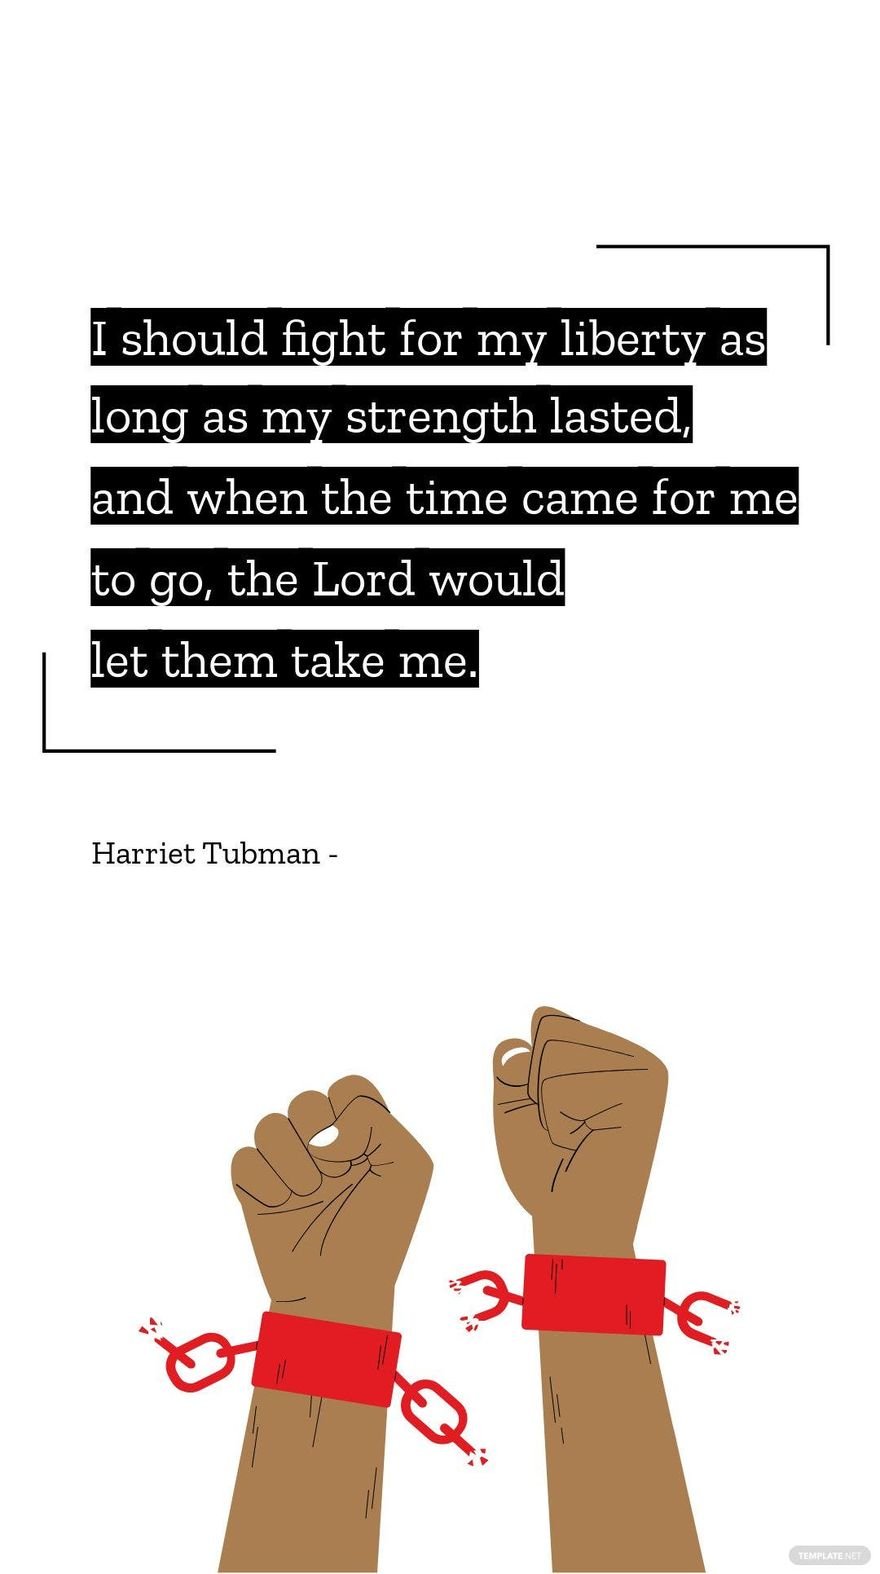 Harriet Tubman - I should fight for my liberty as long as my strength lasted, and when the time came for me to go, the Lord would let them take me. in JPG